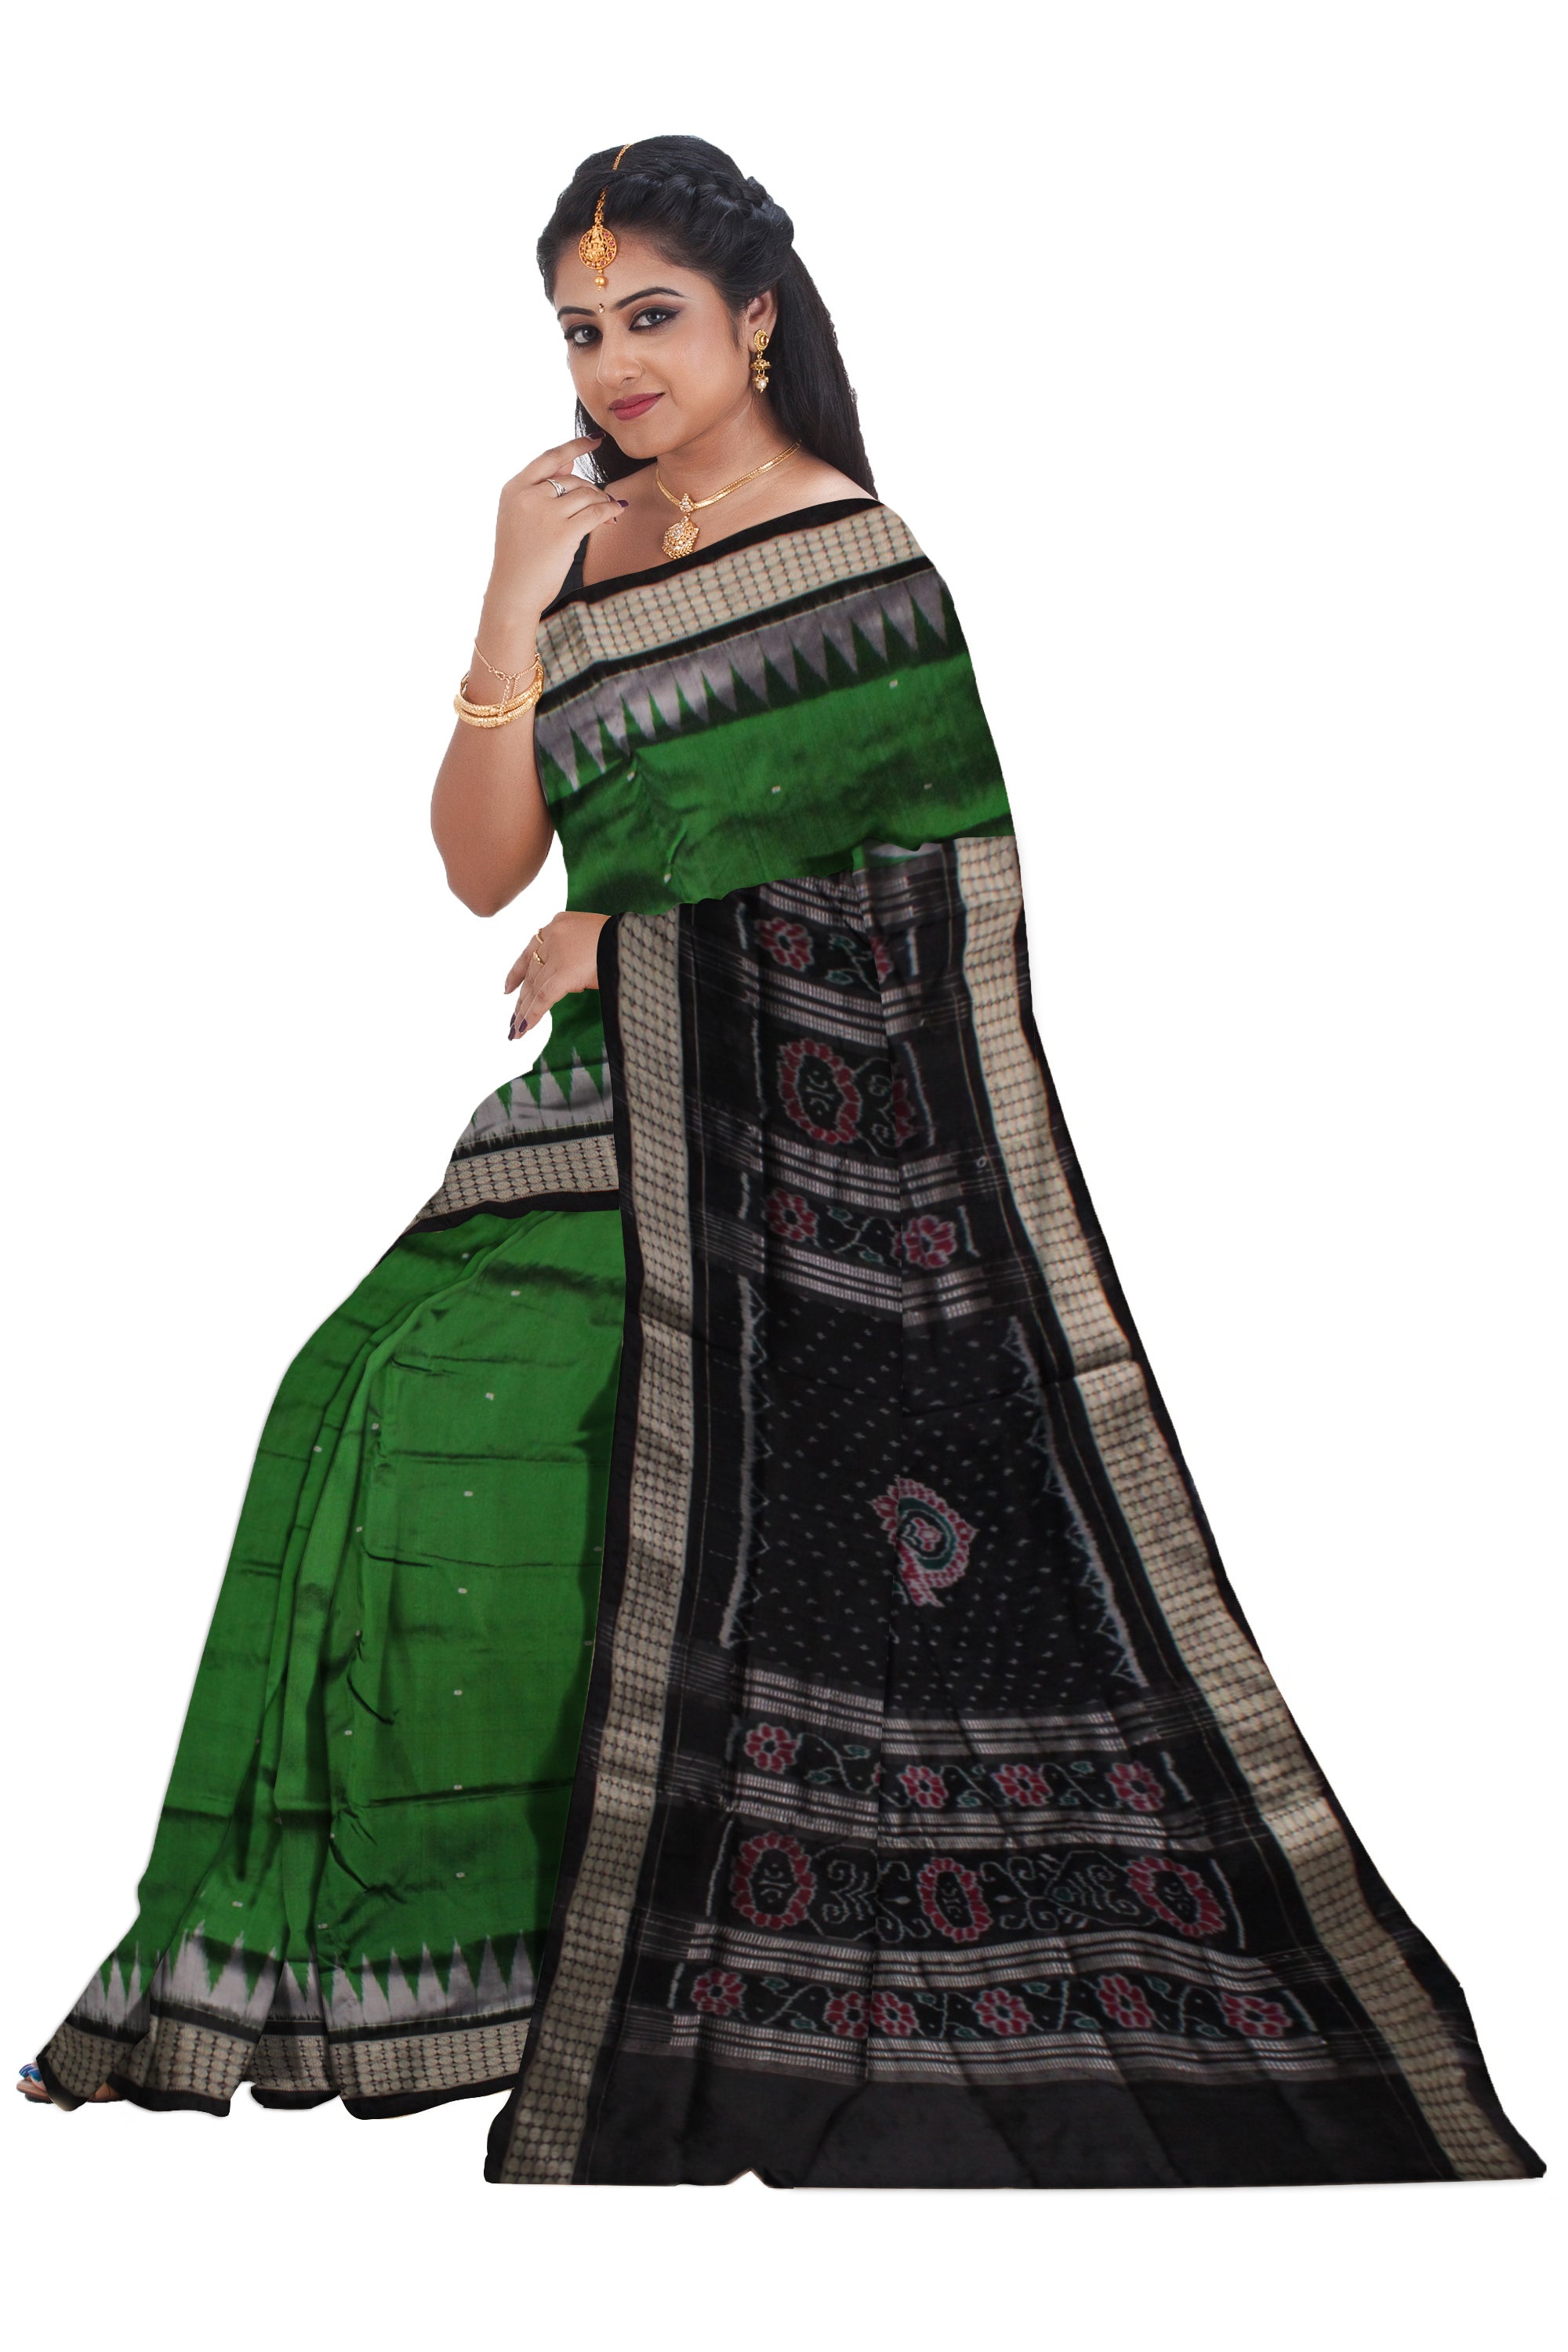 SMALL BOOTY PATTERN PATA SAREE IS GREEN AND BLACK COLOR BASE,COMES WITH MATCHING BLOUSE PIECE. - Koshali Arts & Crafts Enterprise